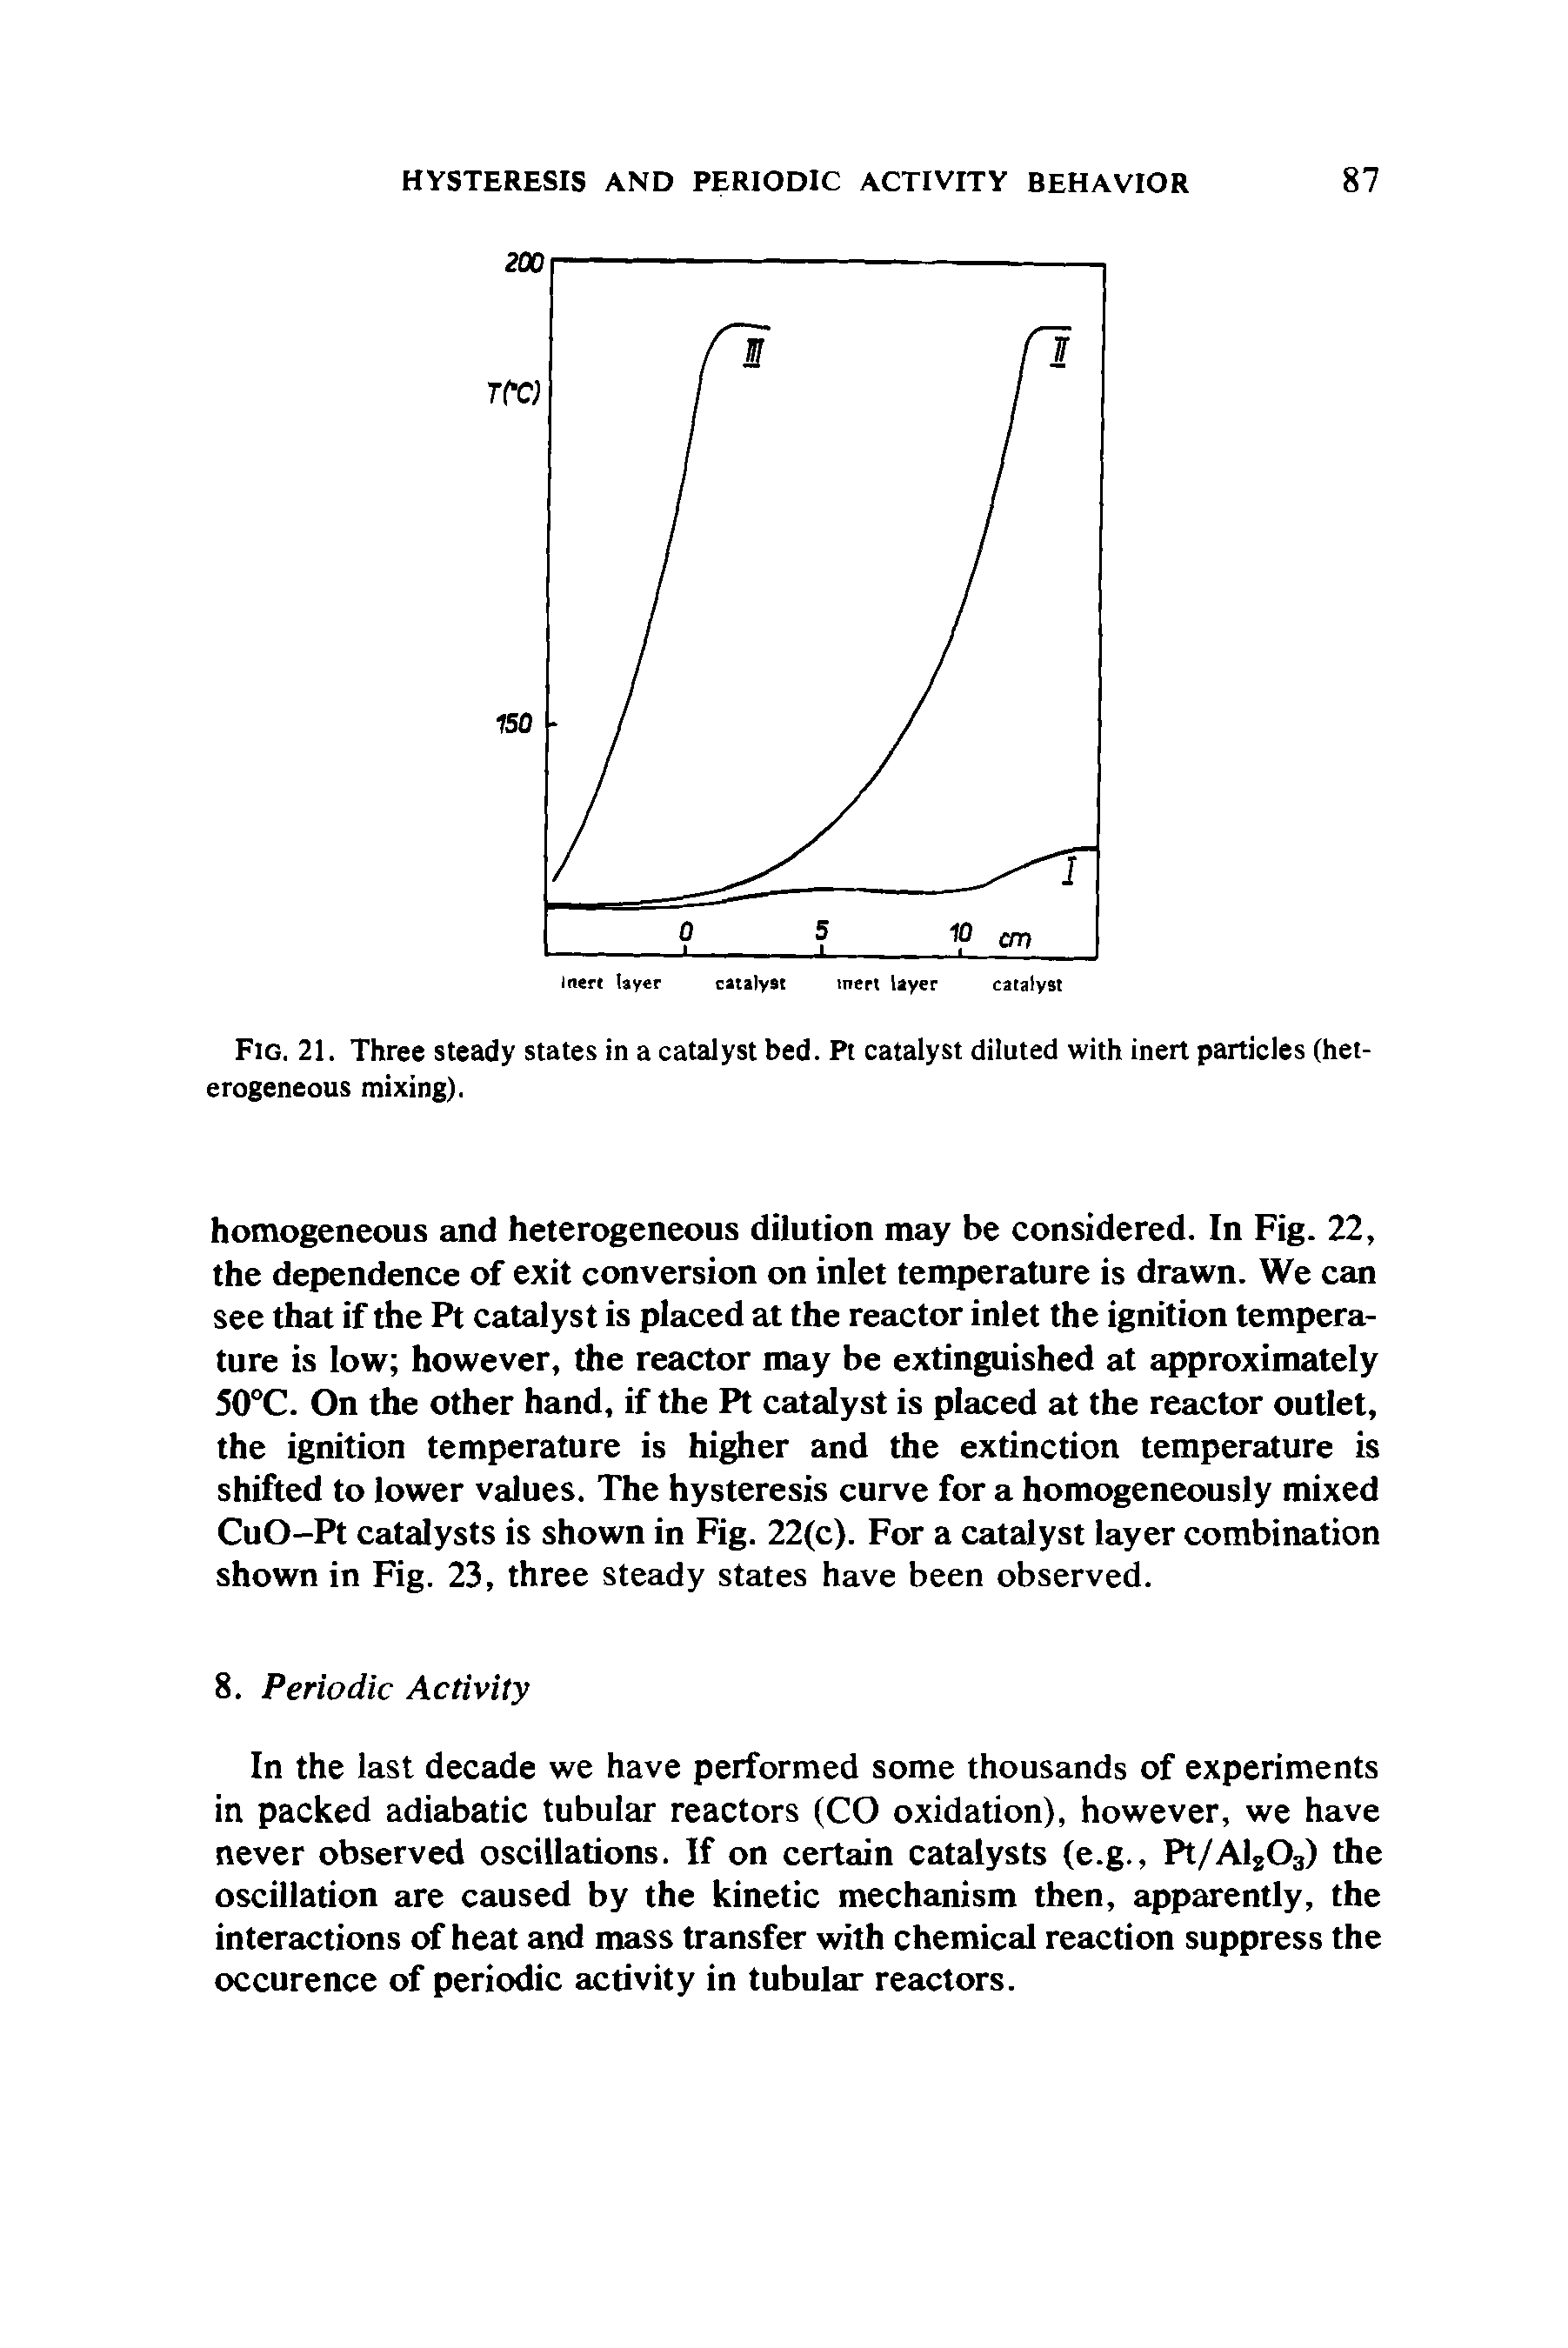 Fig. 21. Three steady states in a catalyst bed. Pt catalyst diluted with inert particles (heterogeneous mixing).